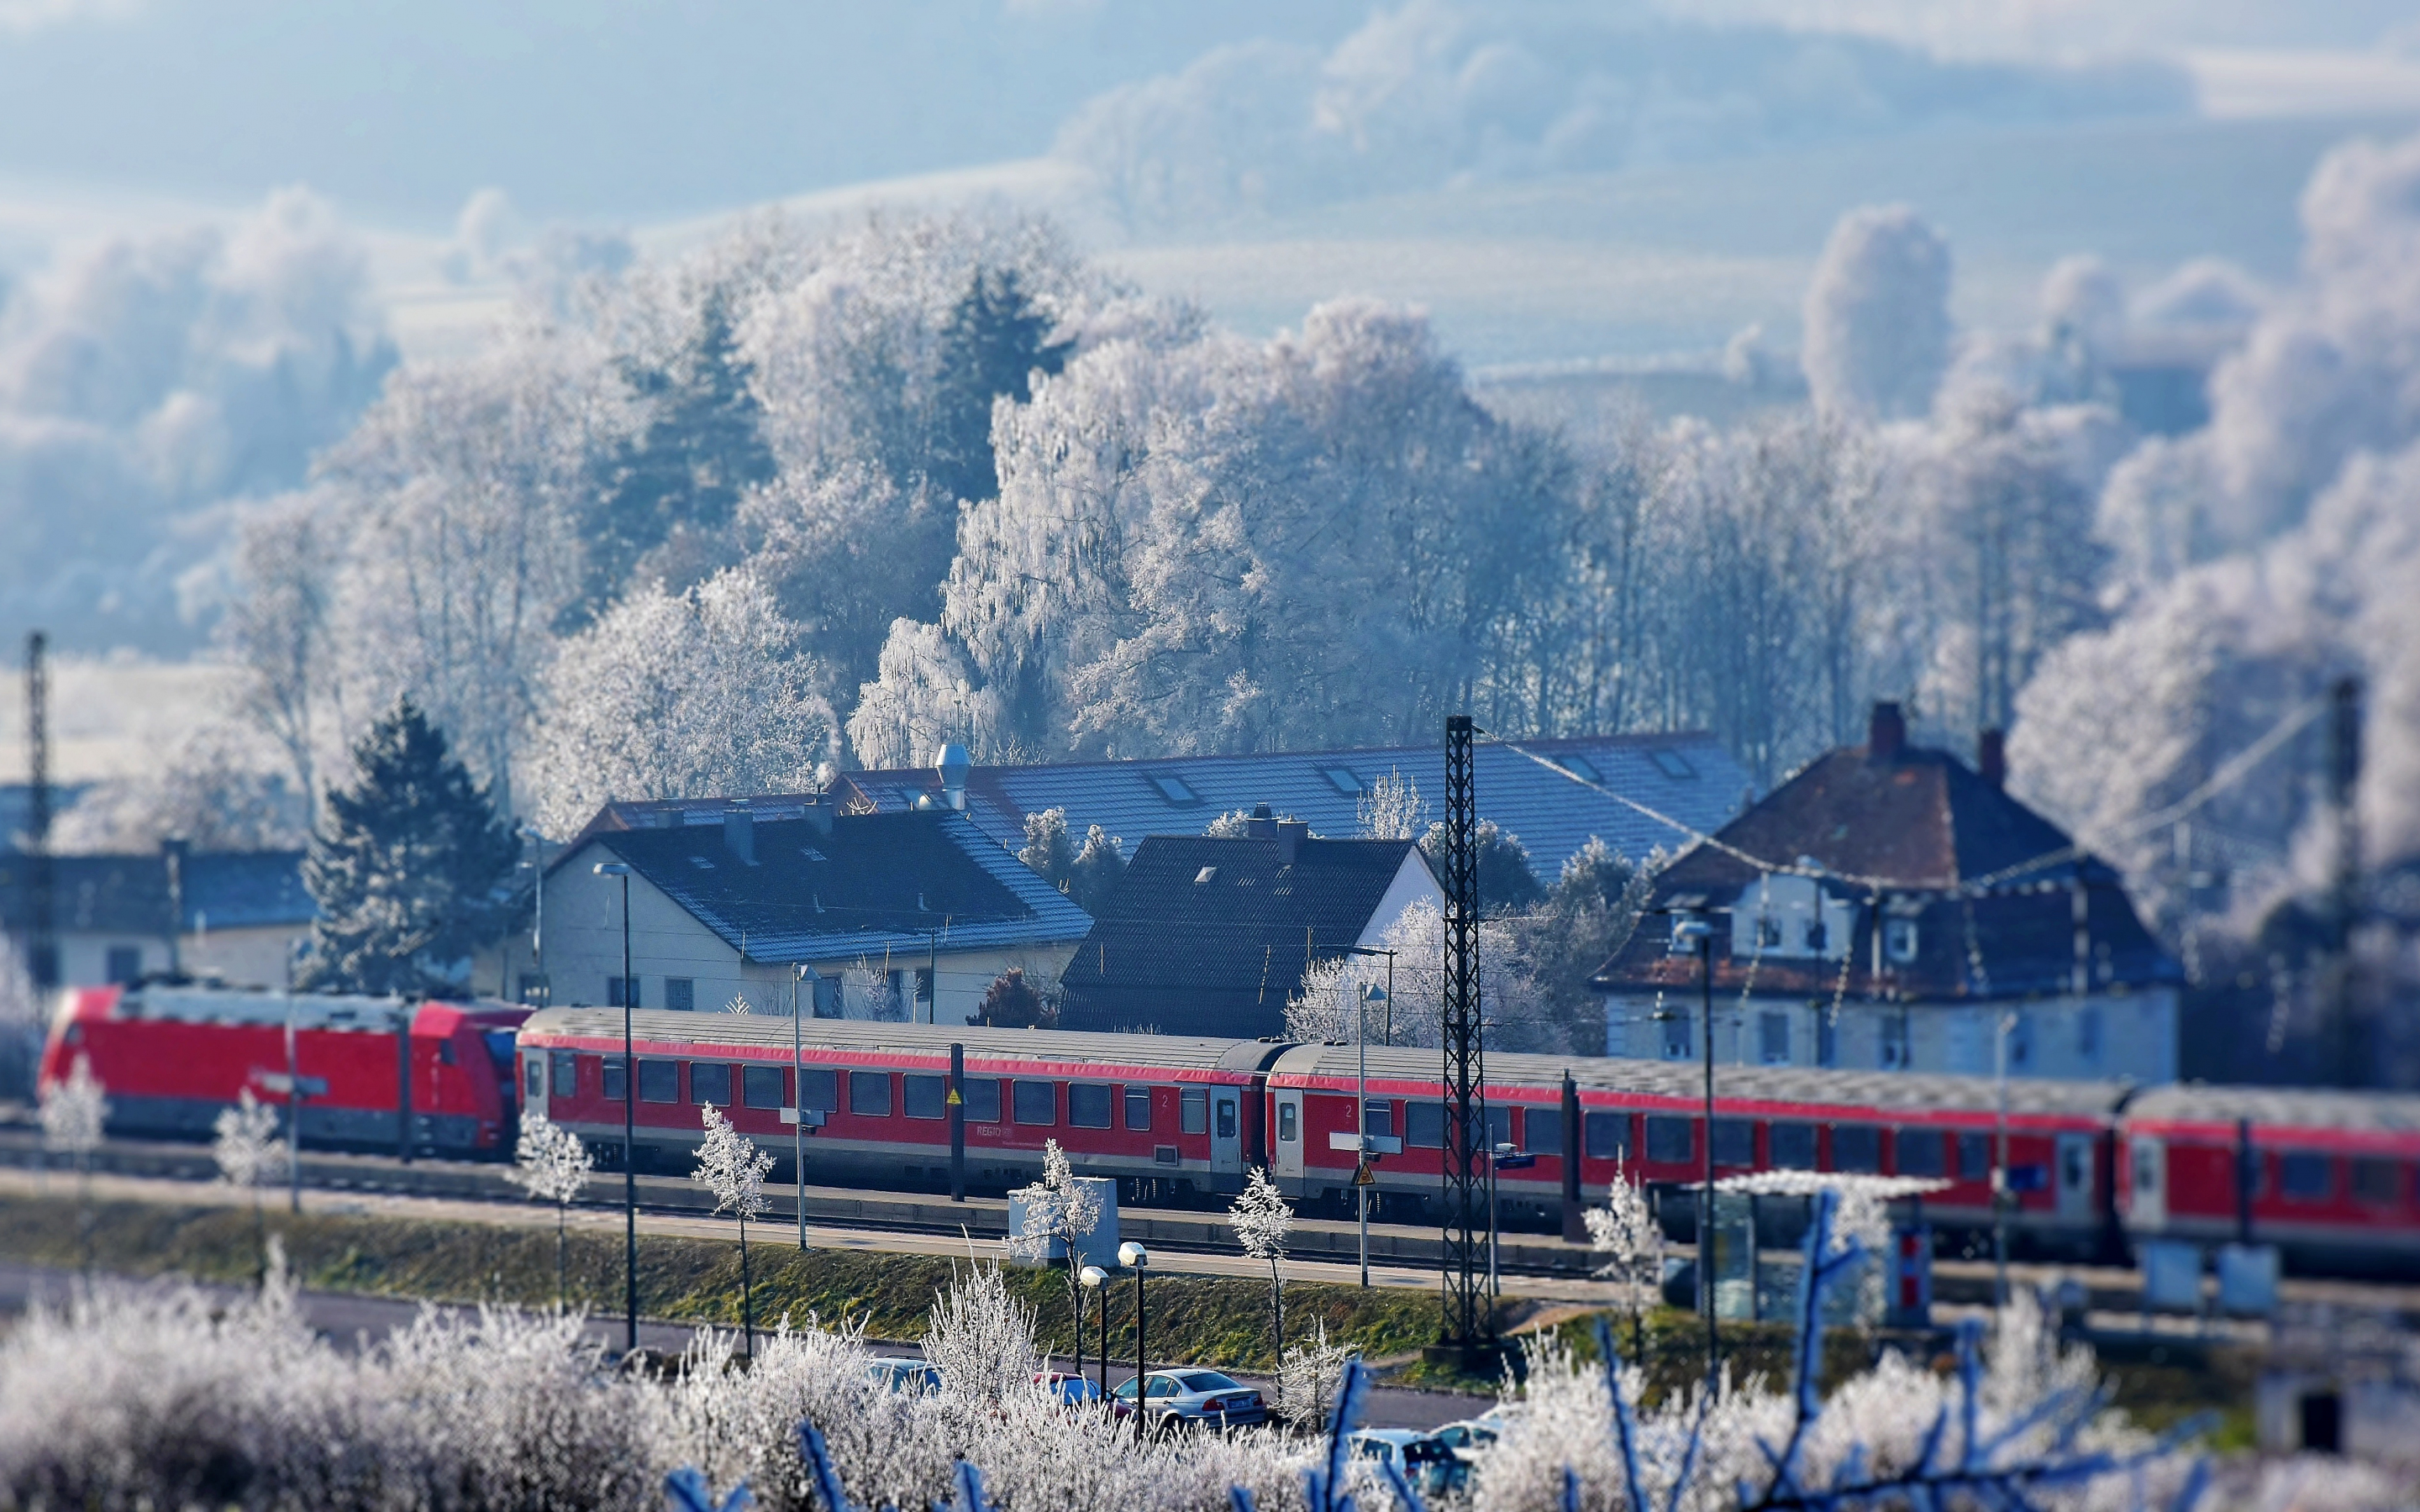 Train, winter, snowfrost, houses, town, 2880x1800 wallpaper